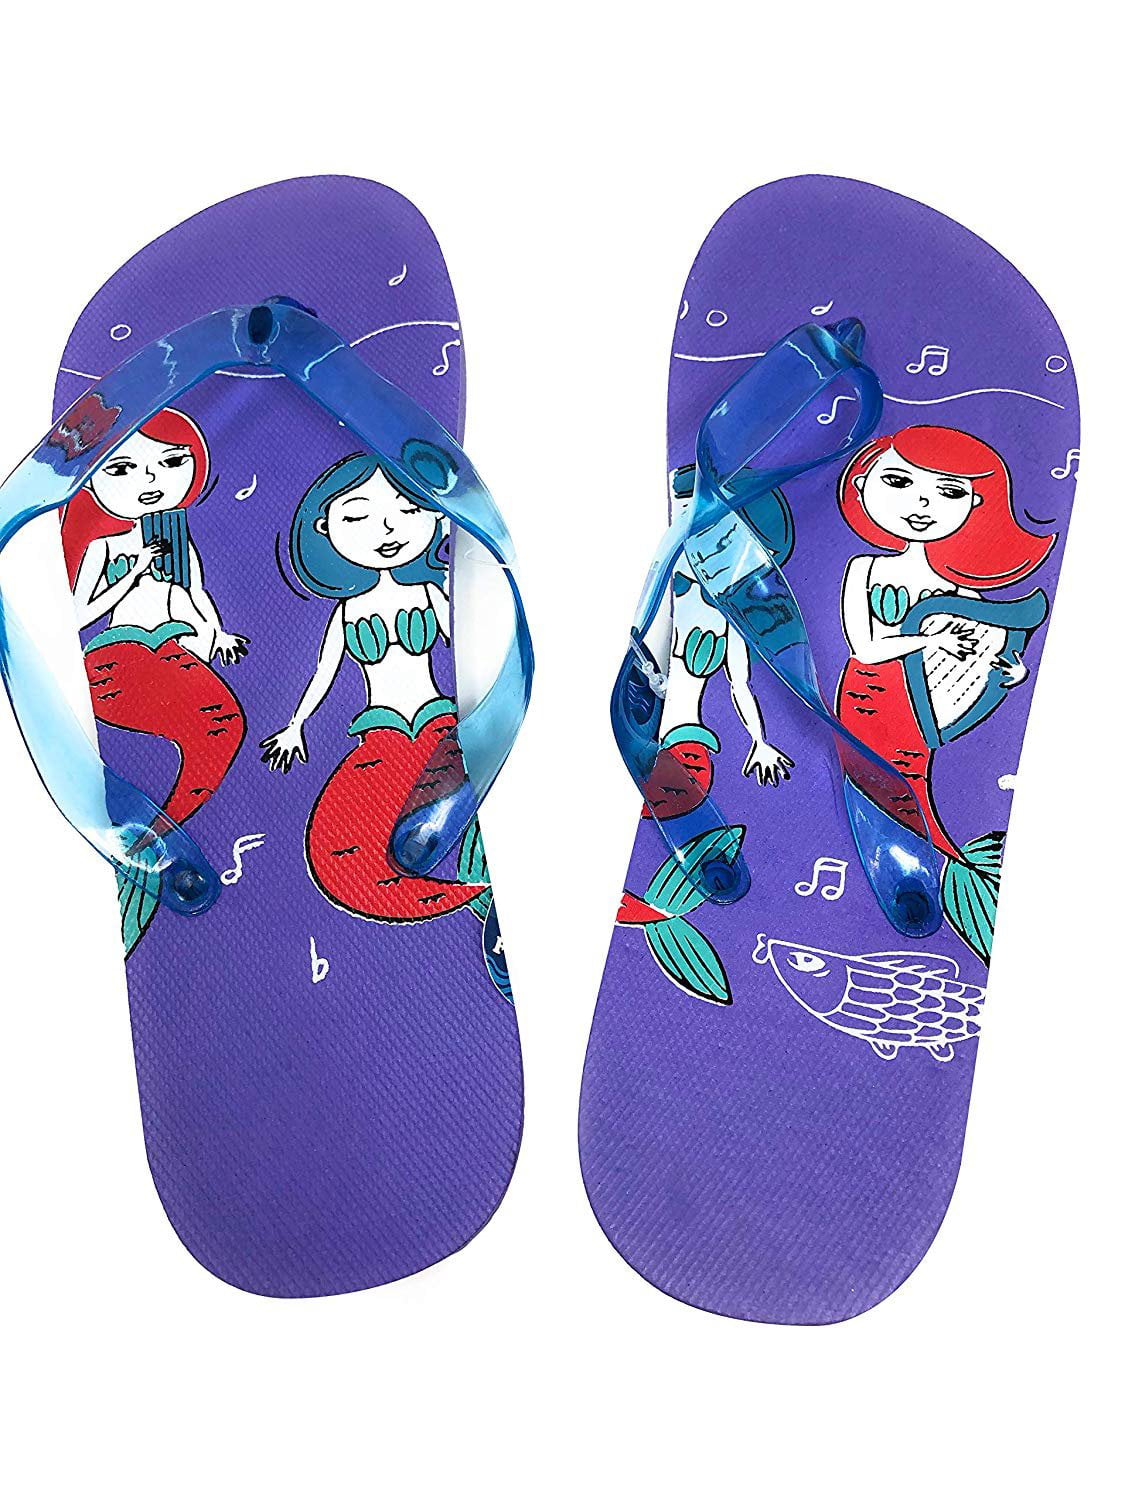 Jelly Thong Style Mermaid Themed Flip Flop Sandals for Young Girls Kids